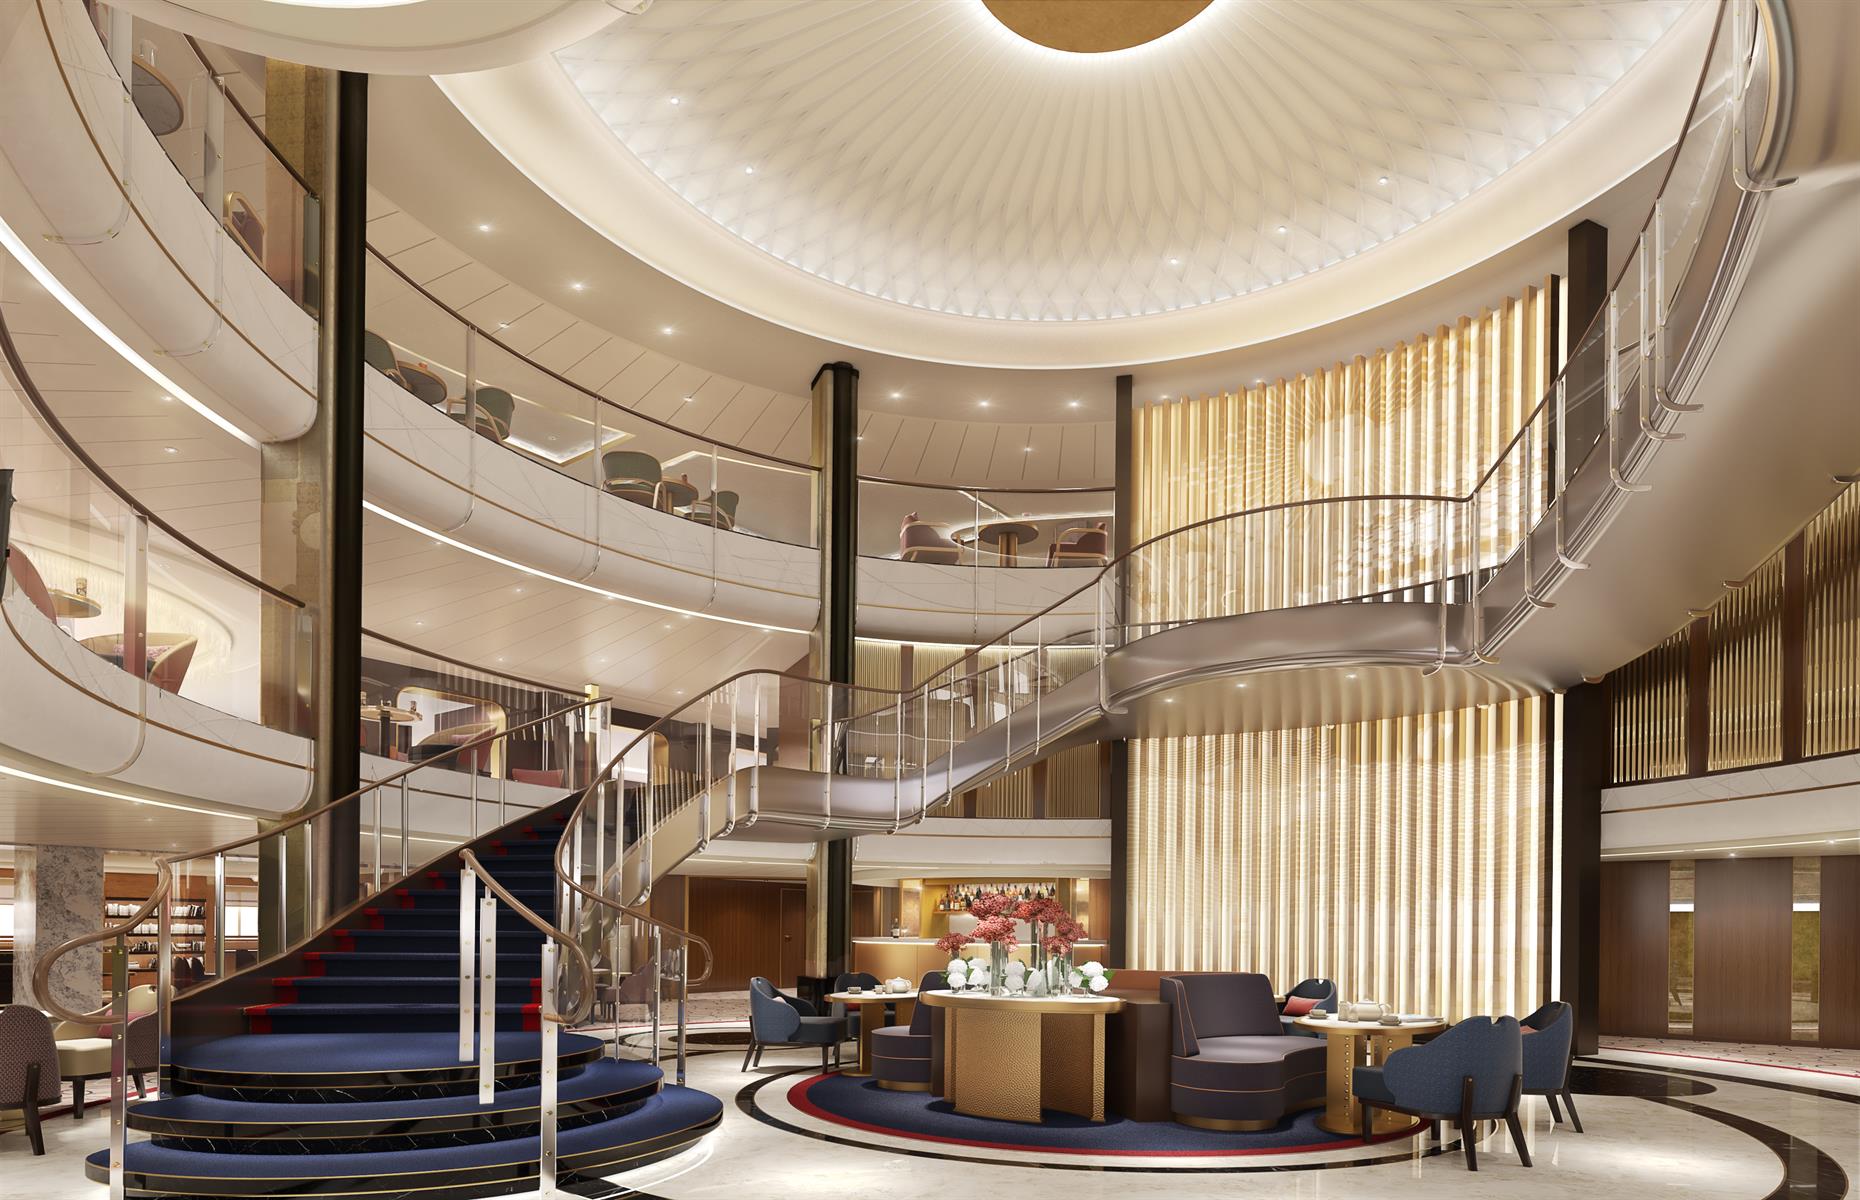 <p>There will be six categories of accommodation and cabins have been designed by Sybille de Margerie, whose portfolio includes Atlantis, The Royal Residences in Dubai. The ship’s <em>piece de resistance </em>will almost certainly be the three-story lobby, closely followed by the ornate 835-seat Royal Court Theater. Another reason to love this ship, which will initially sail the waters of Northern Europe? It will be helmed by Inger Klein Thorhauge – Cunard’s first female captain.</p>